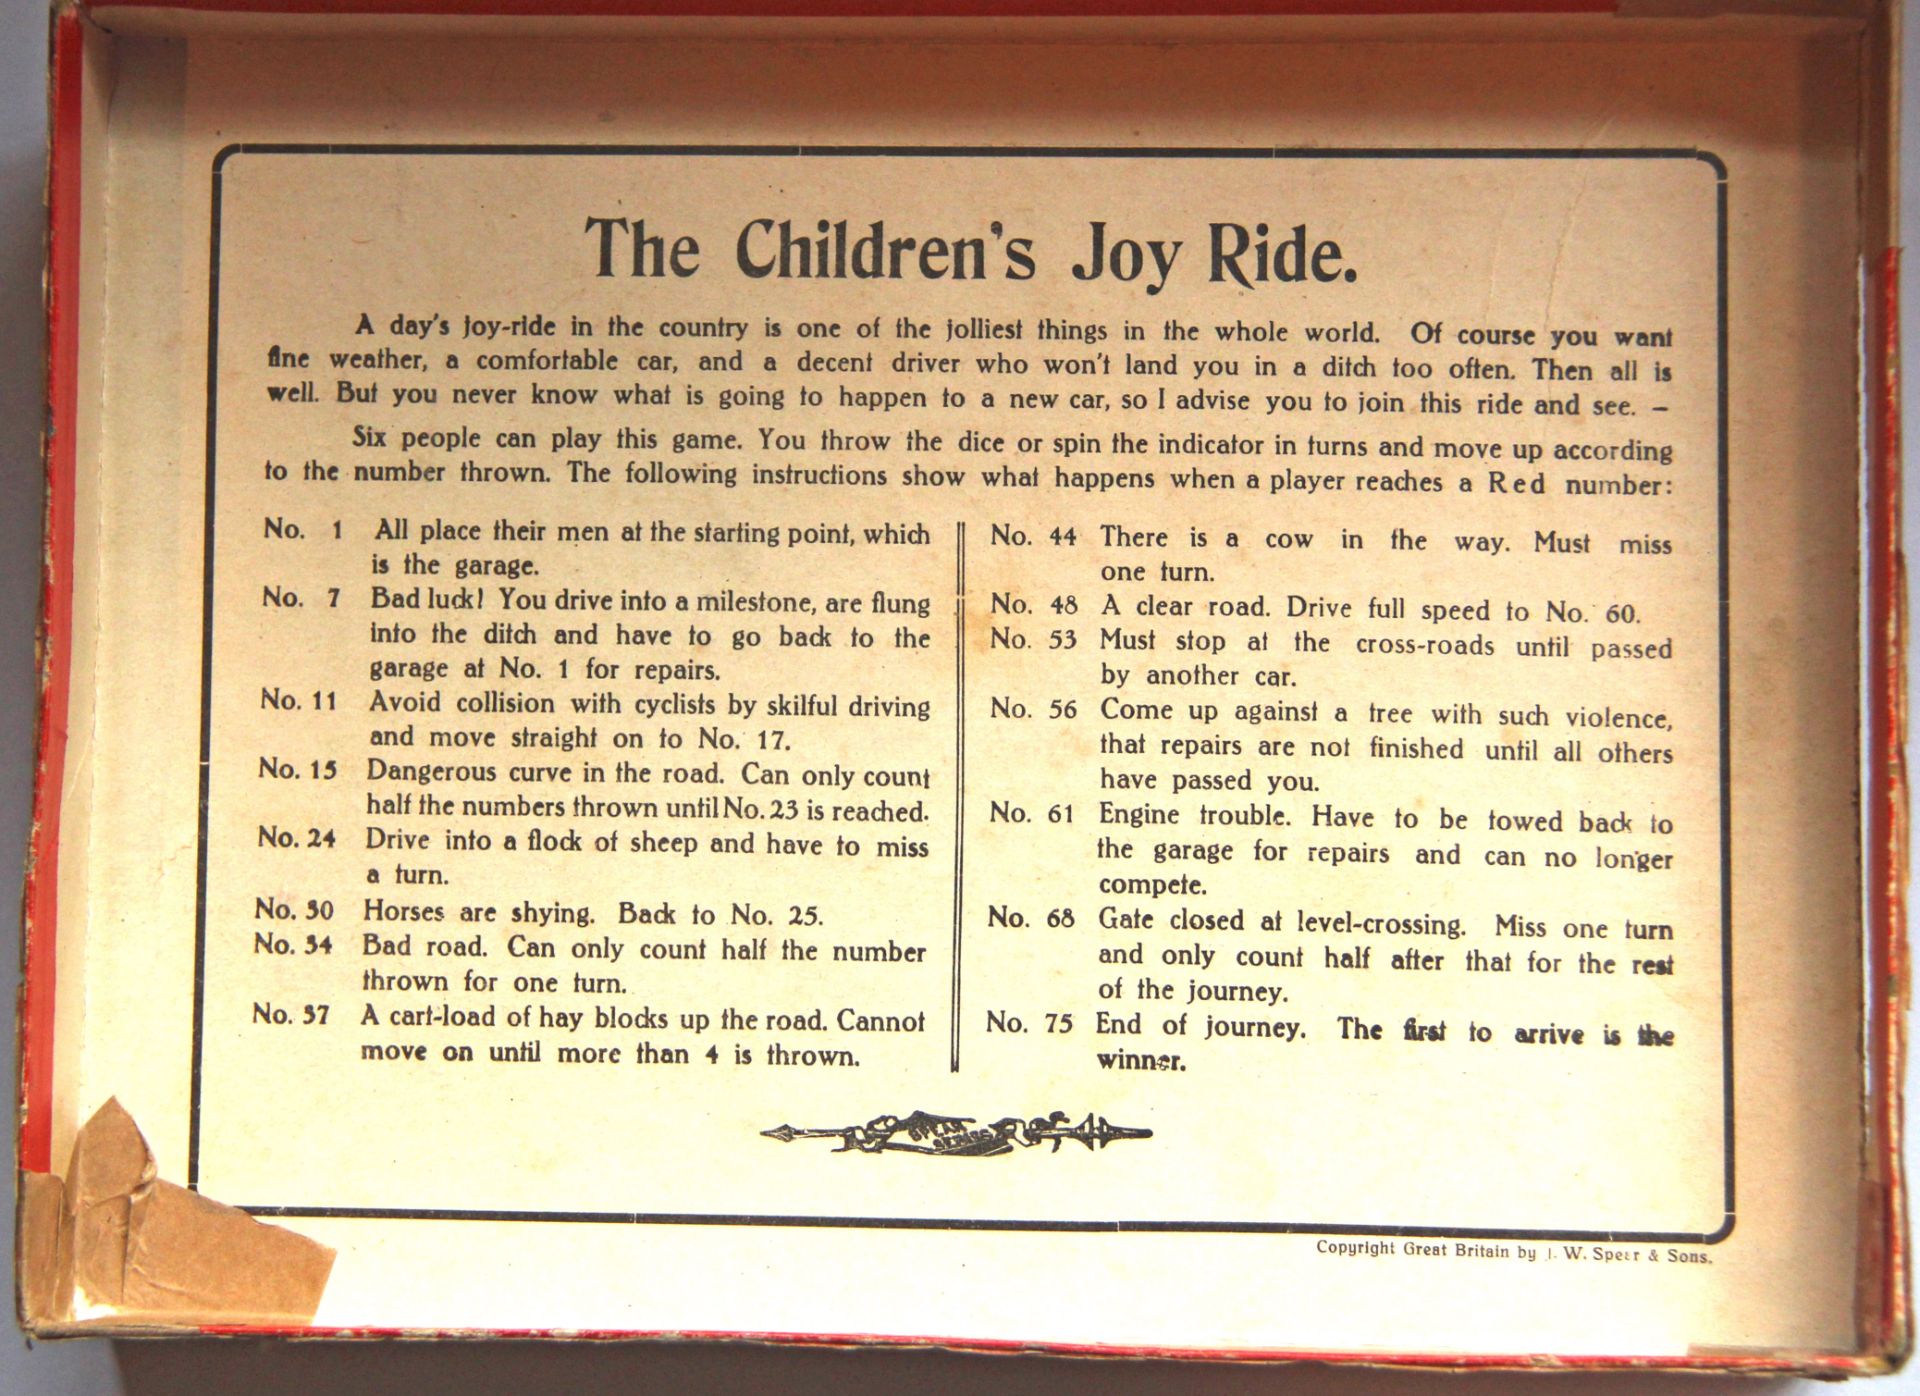 'A Motor Tour' The Children's Joy Ride, with game board, wooden markers, - Image 5 of 5